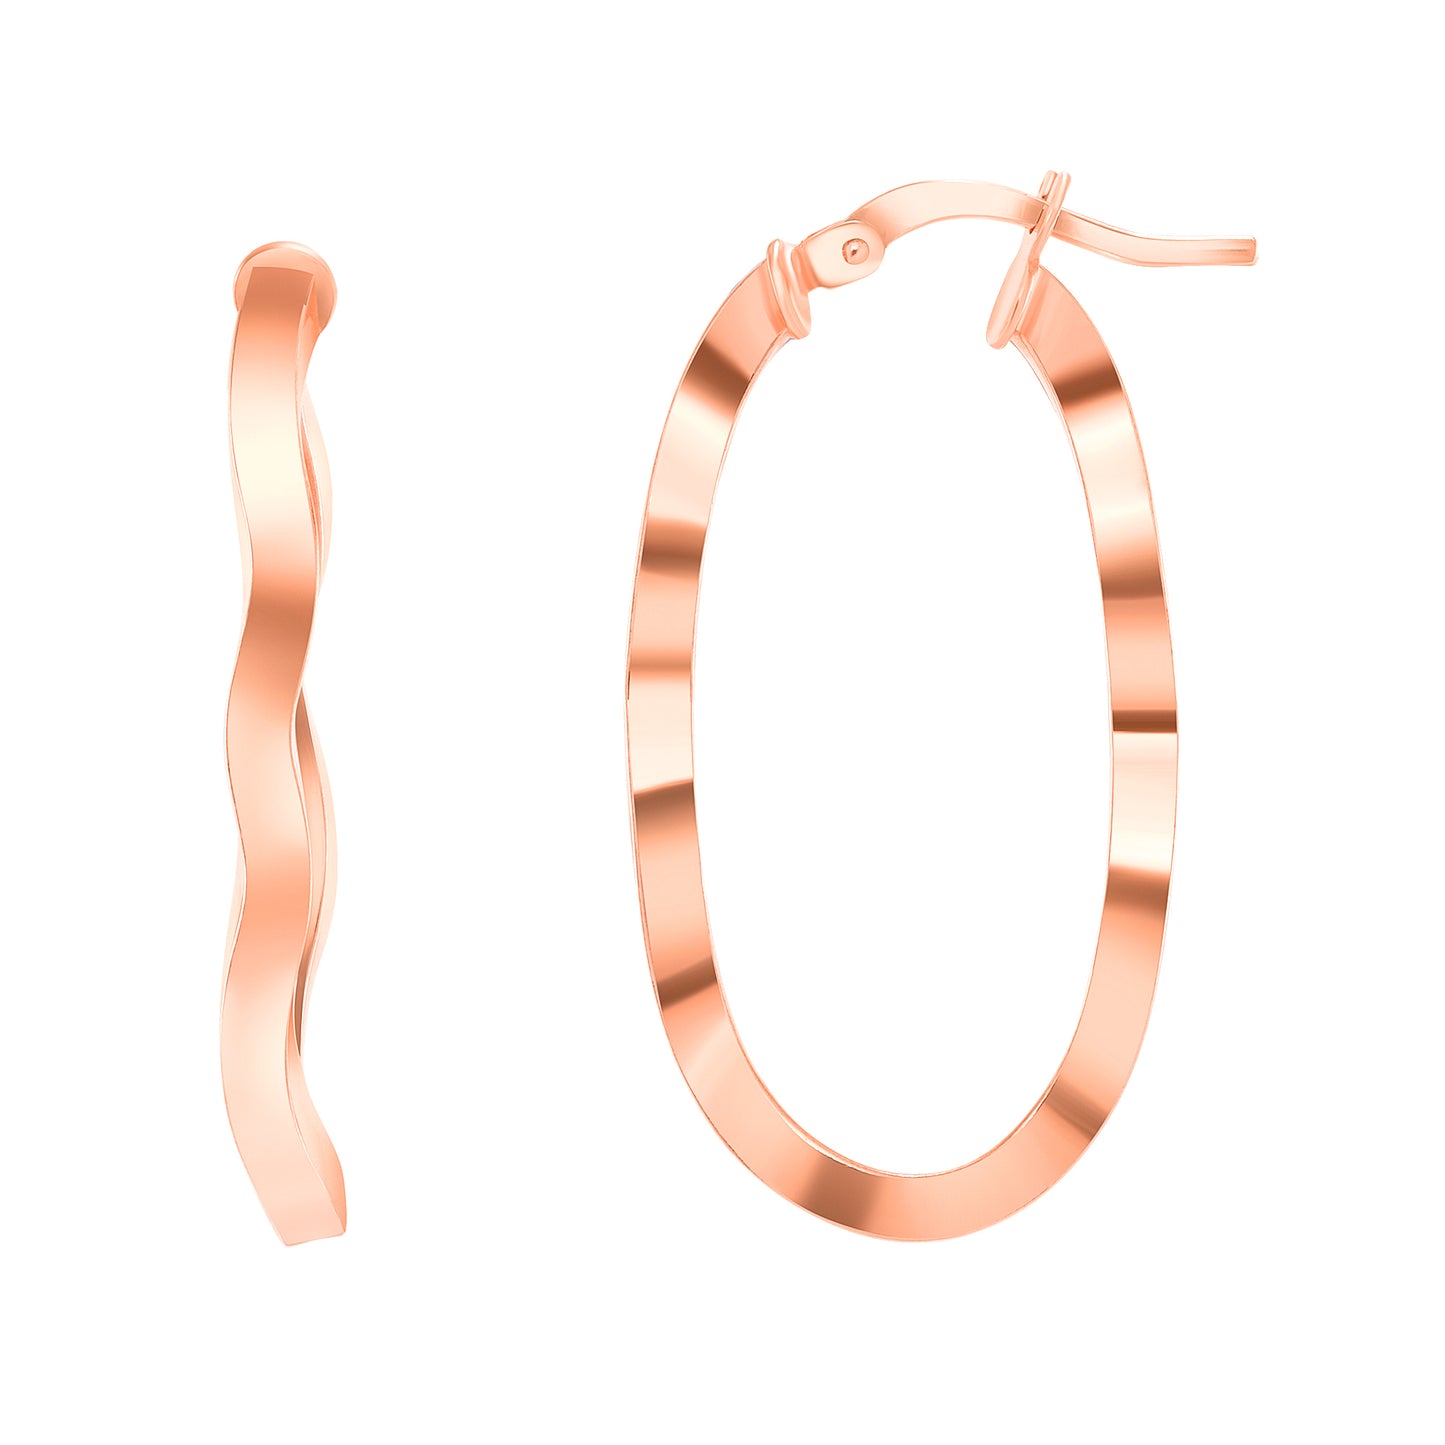 Silver 925 Rose Gold Plated Oval Wavy Plain Hoop Earring 2MM. ITE199RG